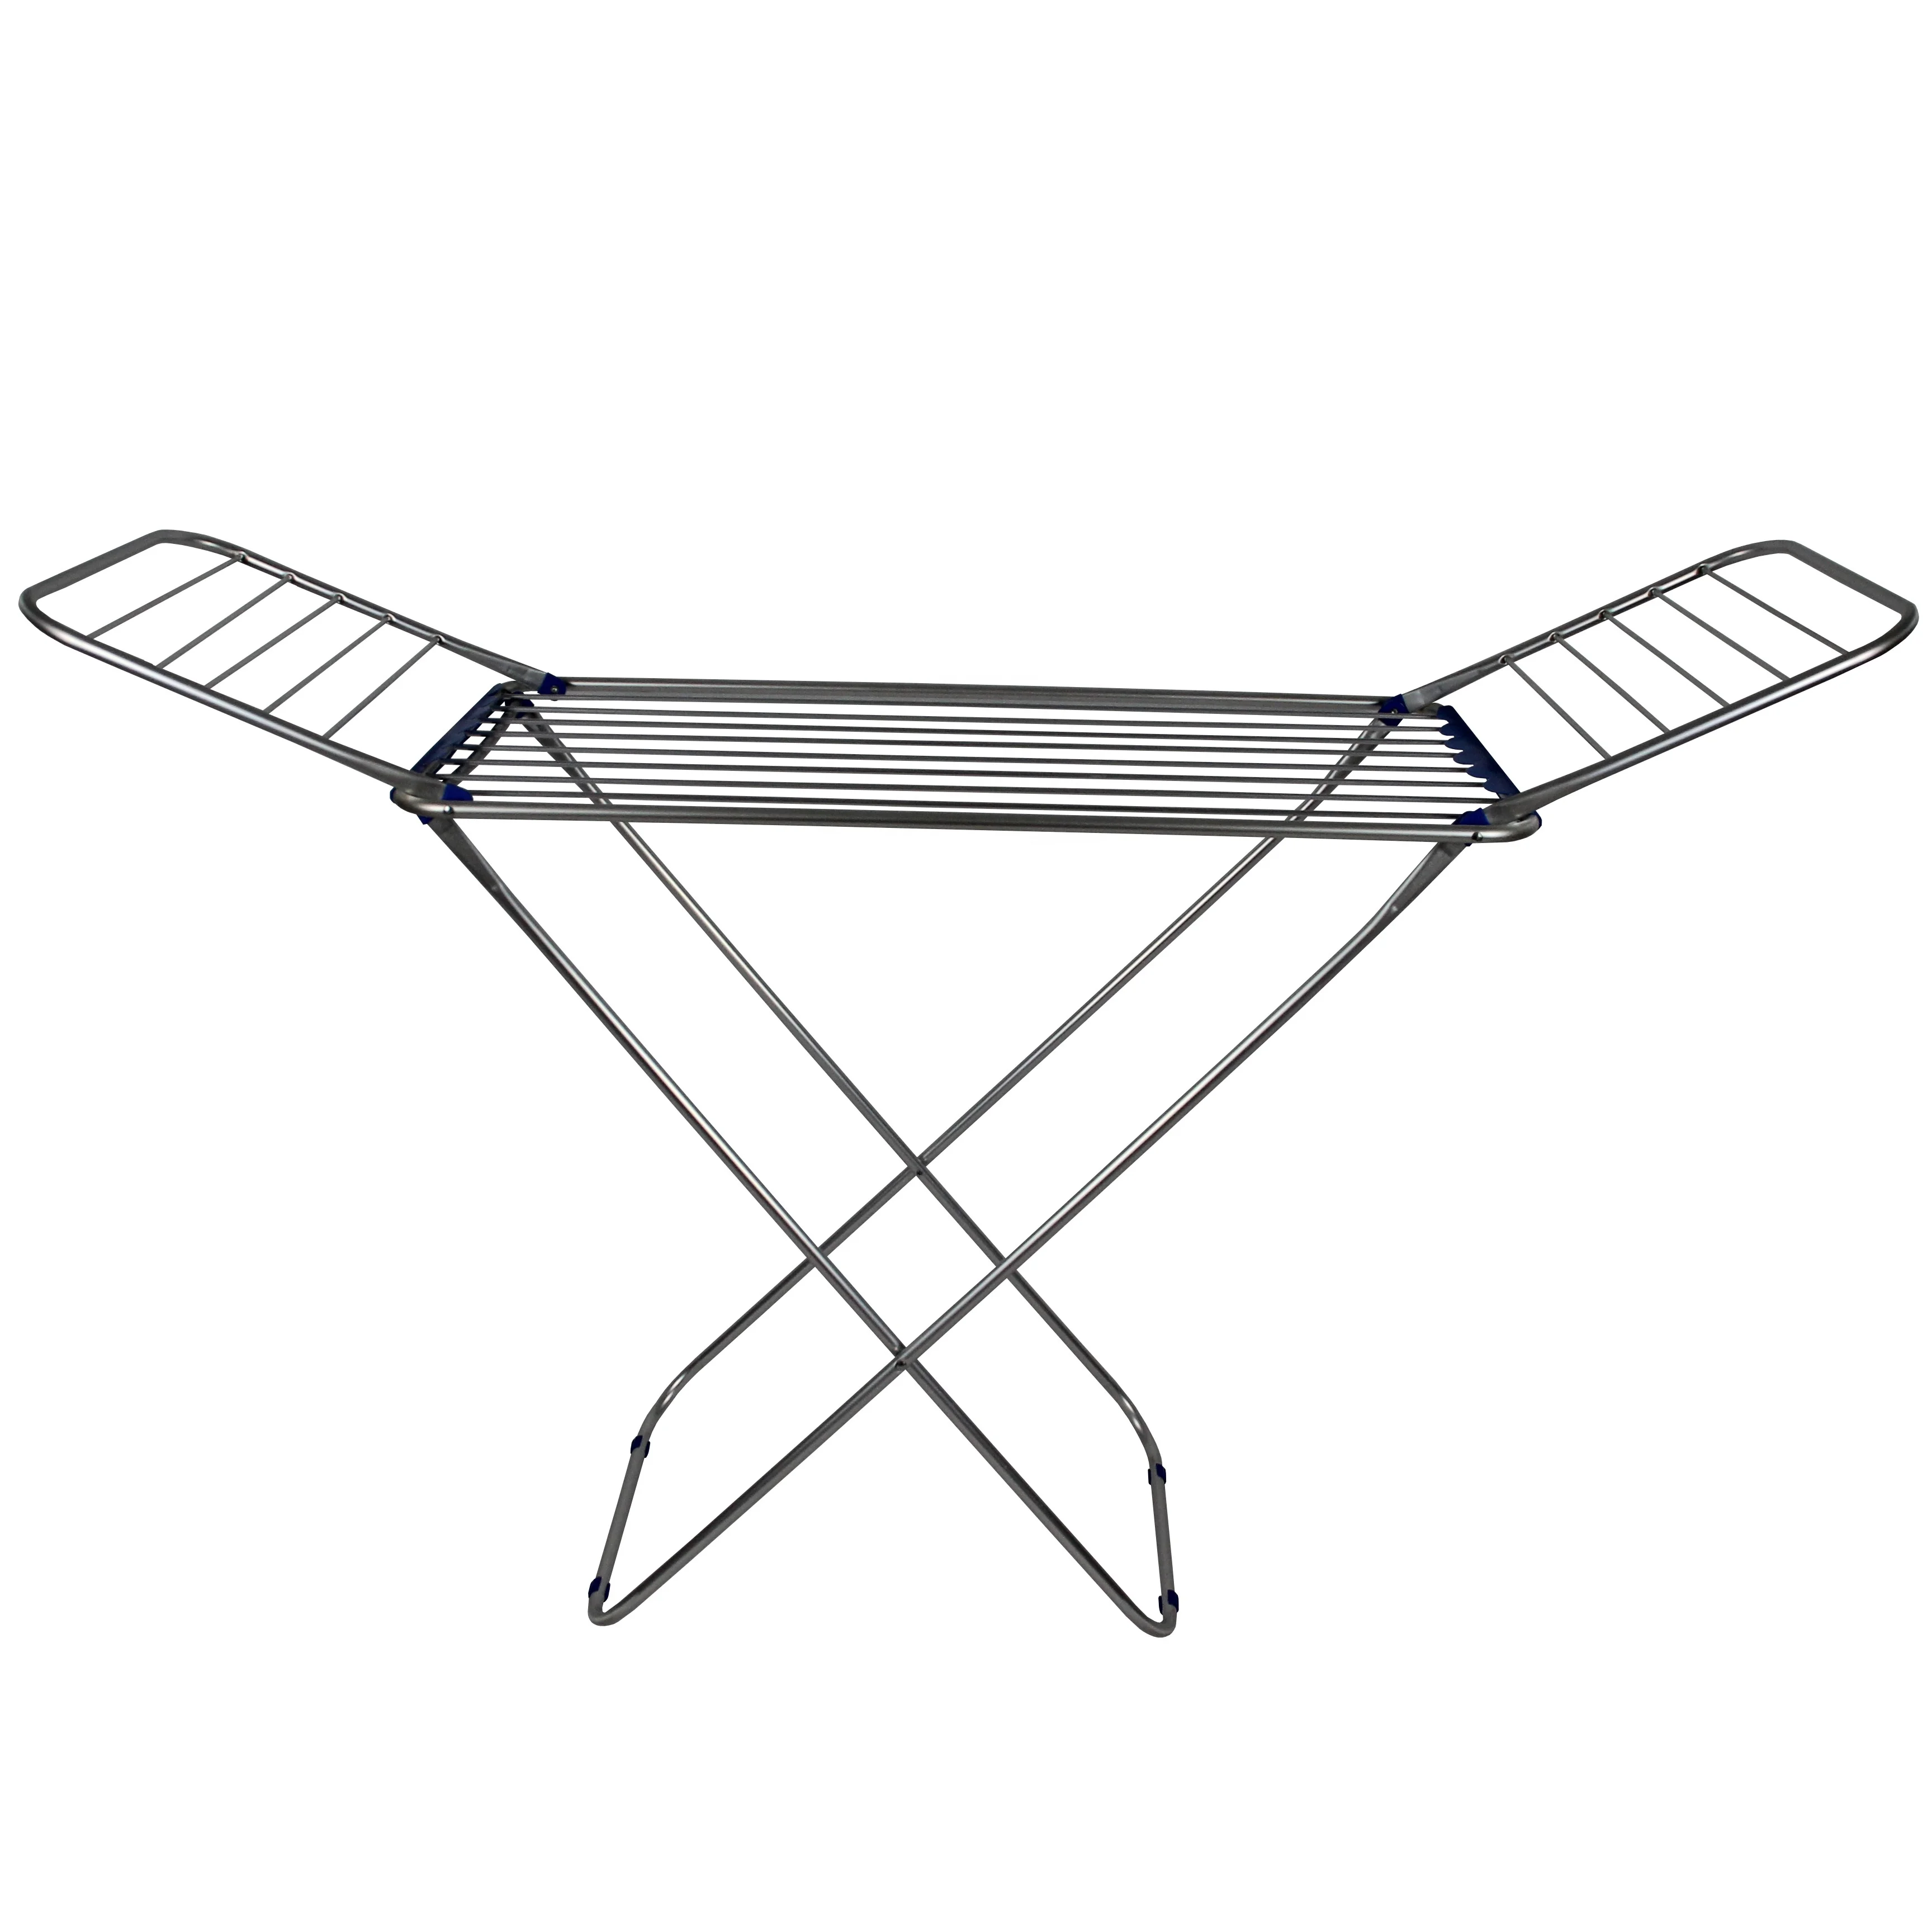 OEM/ODM Aluminum Alloy folding clothes hanger,18M,Mobile clothes drying rack,Shelf suitable for outdoor balcony lawn